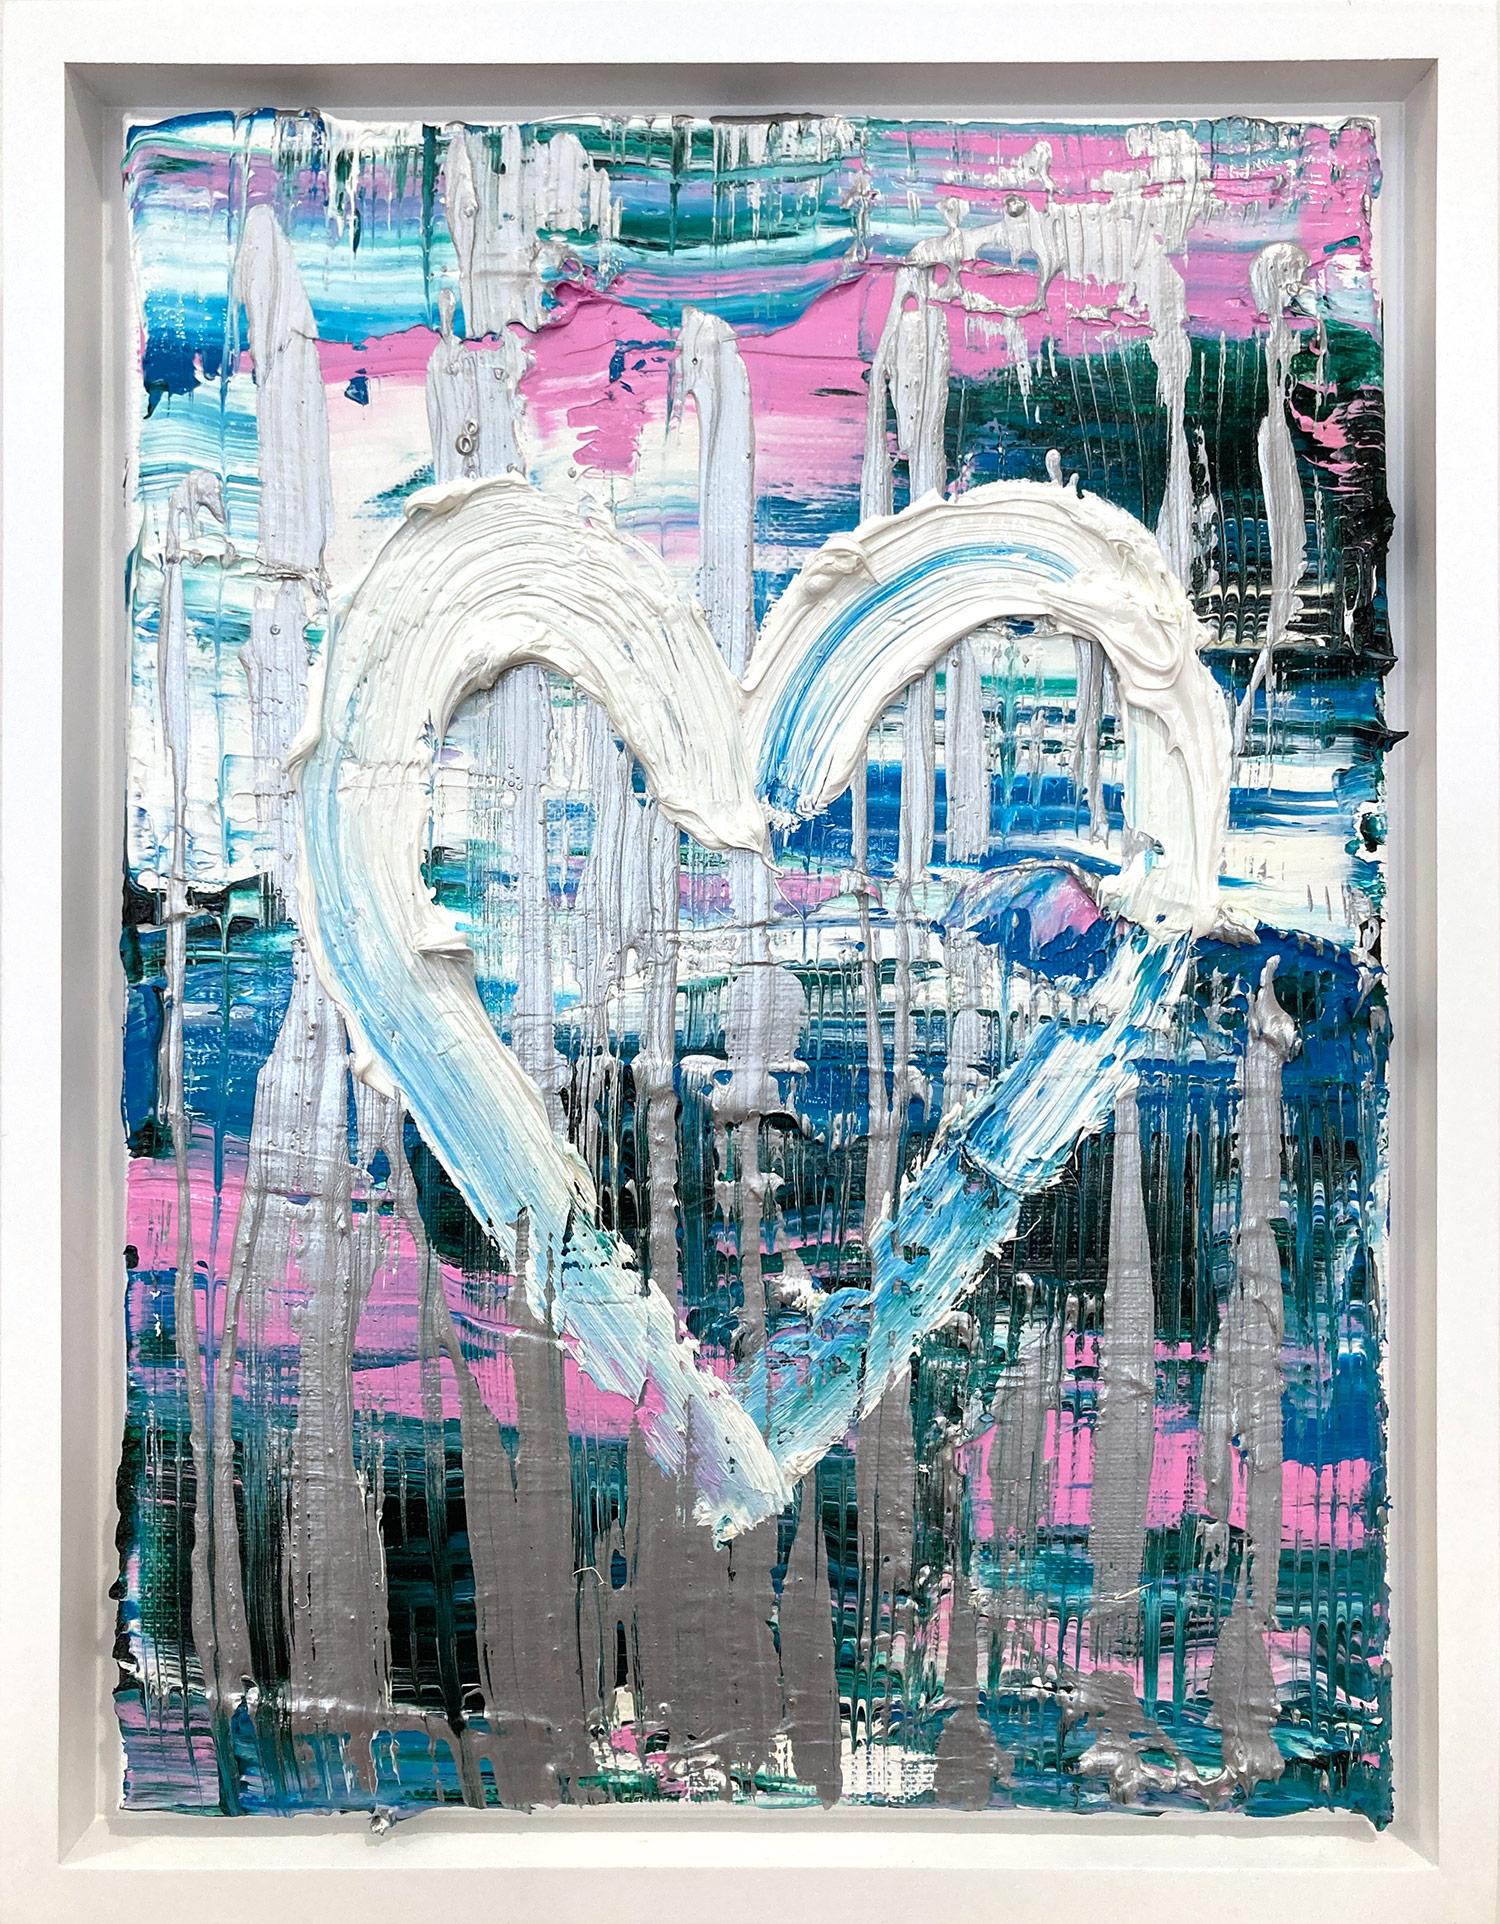 Abstract Painting Cindy Shaoul - "My Sterling Twilight to Midnight Heart" Peinture contemporaine multicolore encadrée